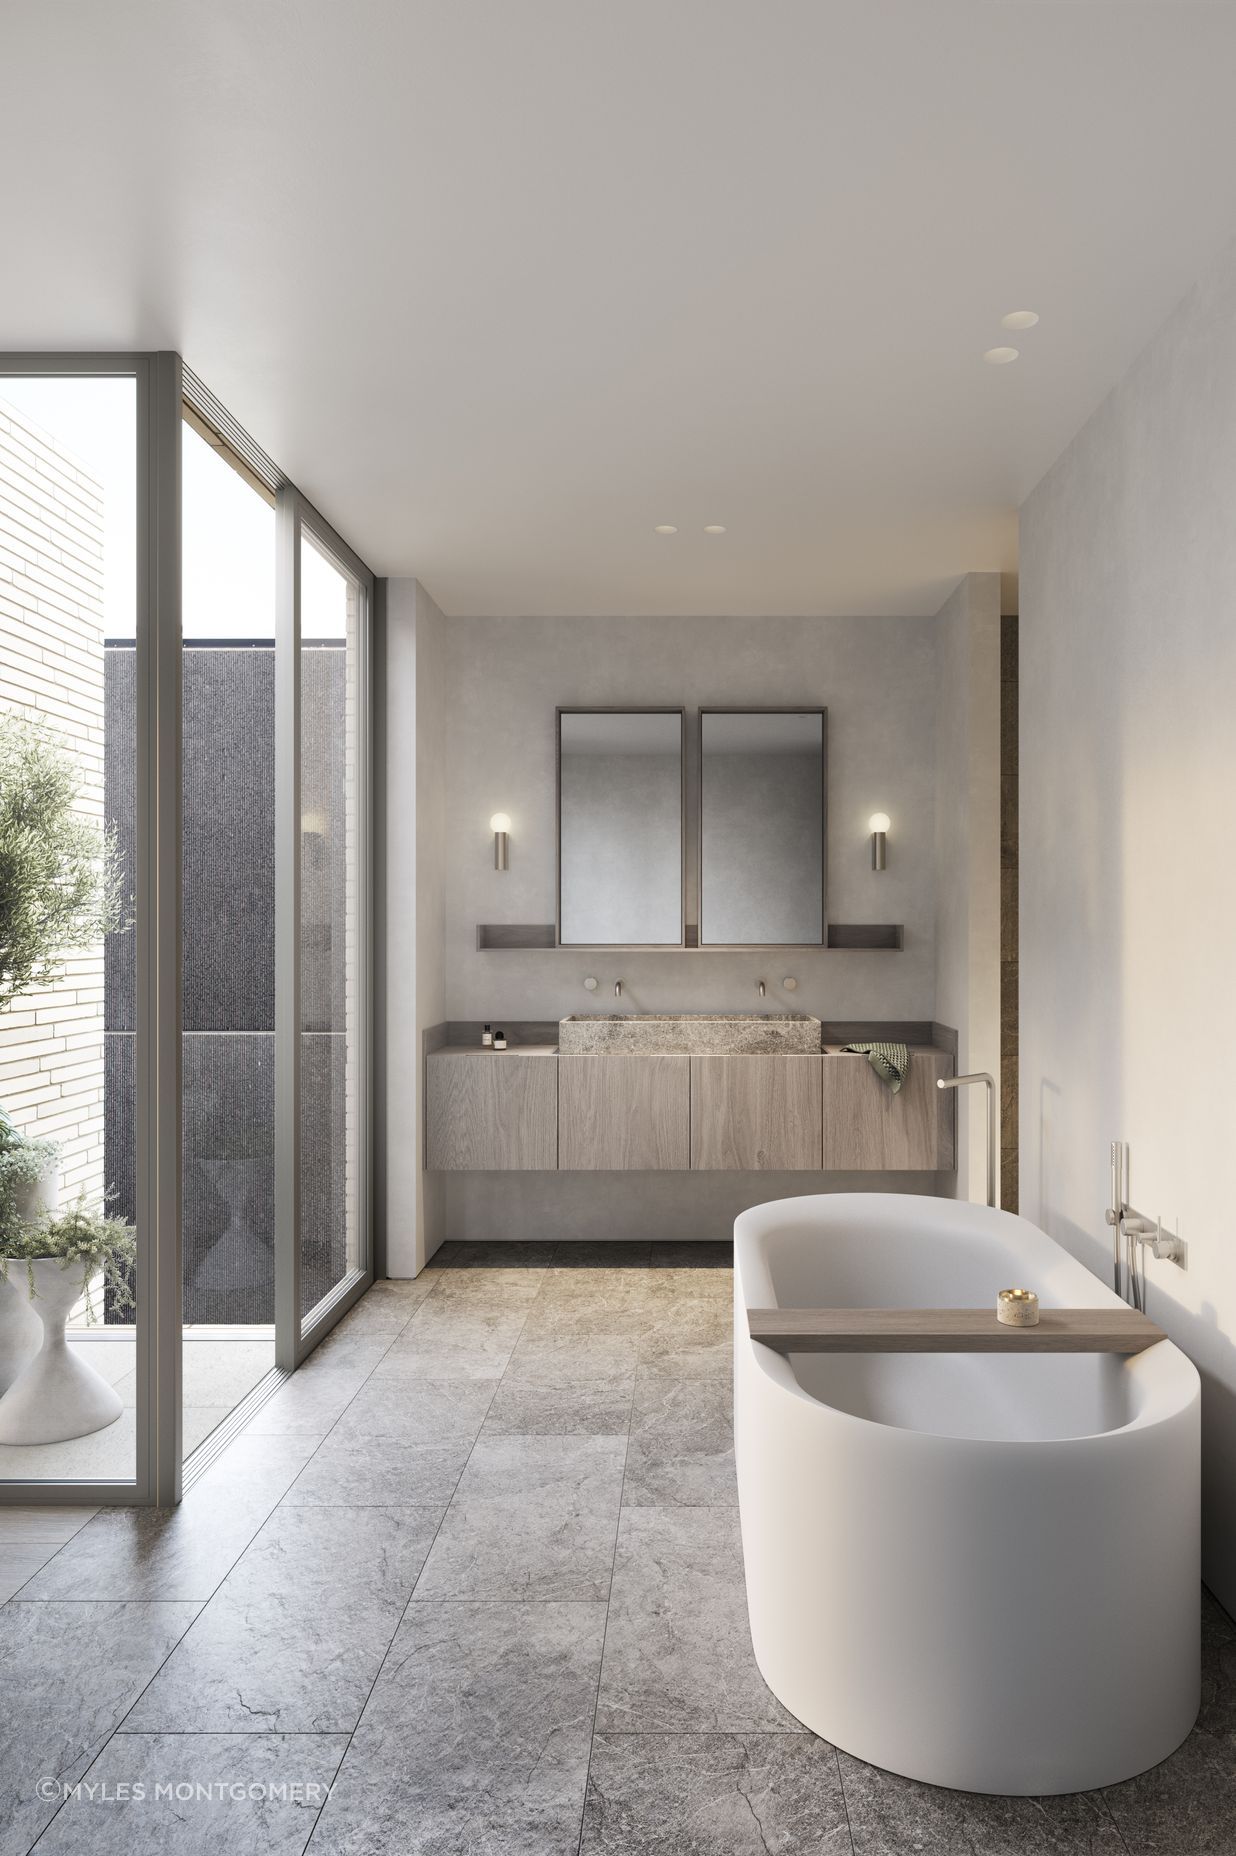 Tumbled marble tiles and carved stone basins imbue bathrooms with an elegant tactility.